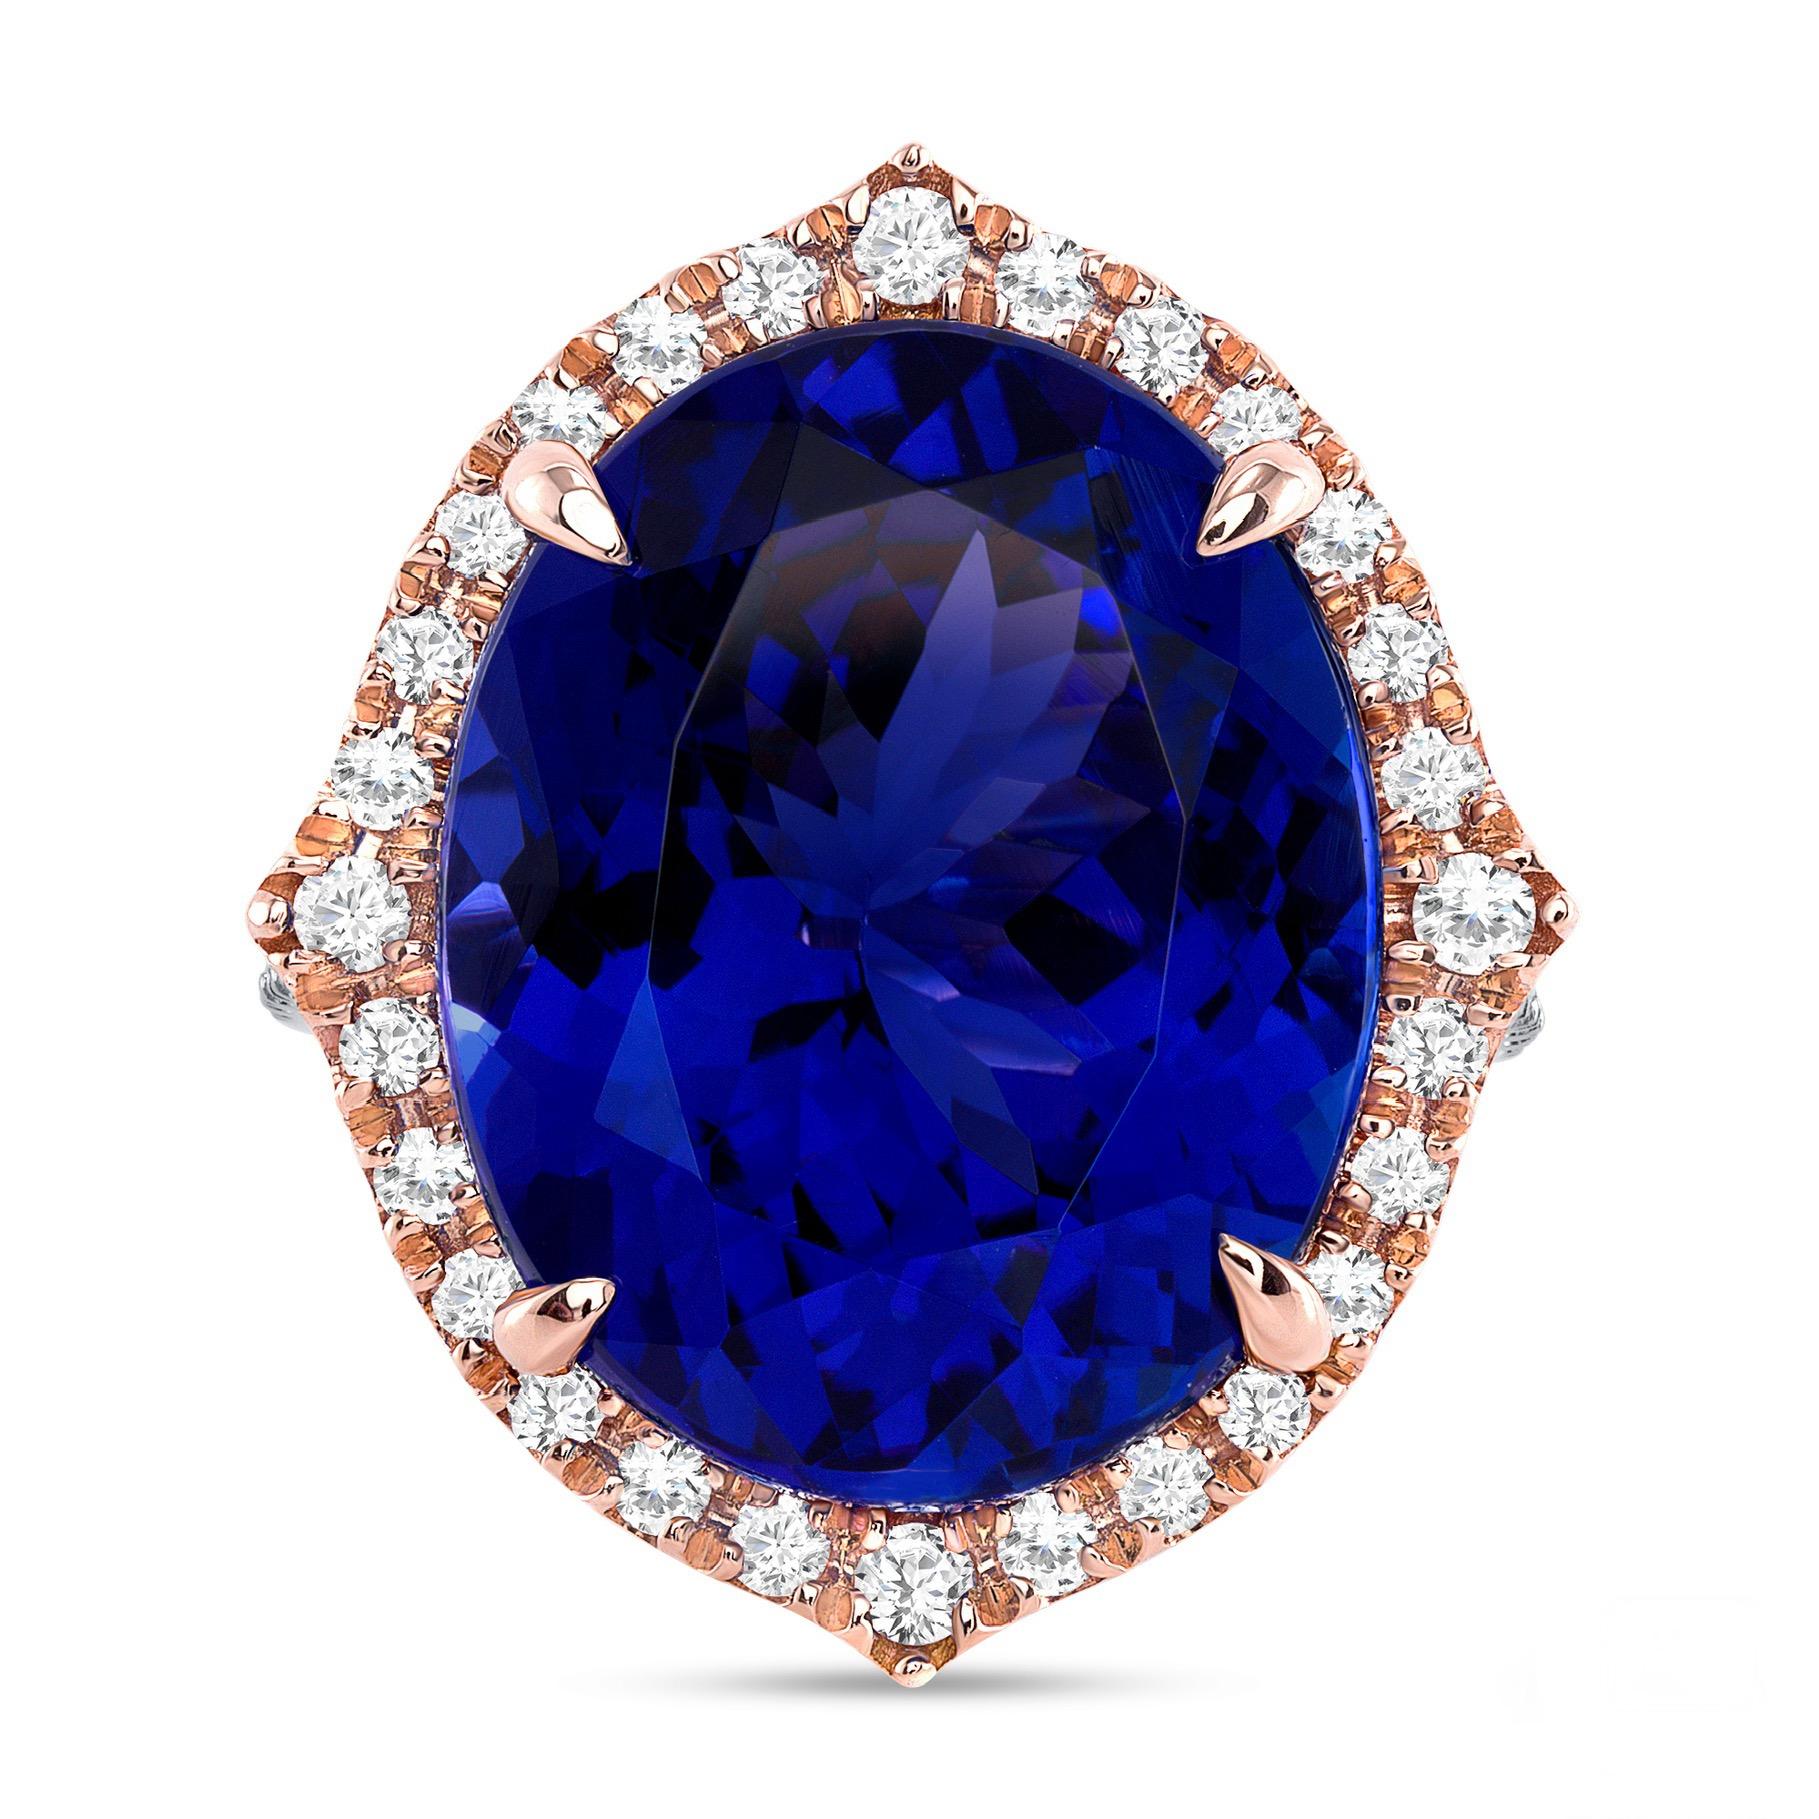 Modern 18.13ct GIA certified, oval Tanzanite ring in 18K rose gold. For Sale